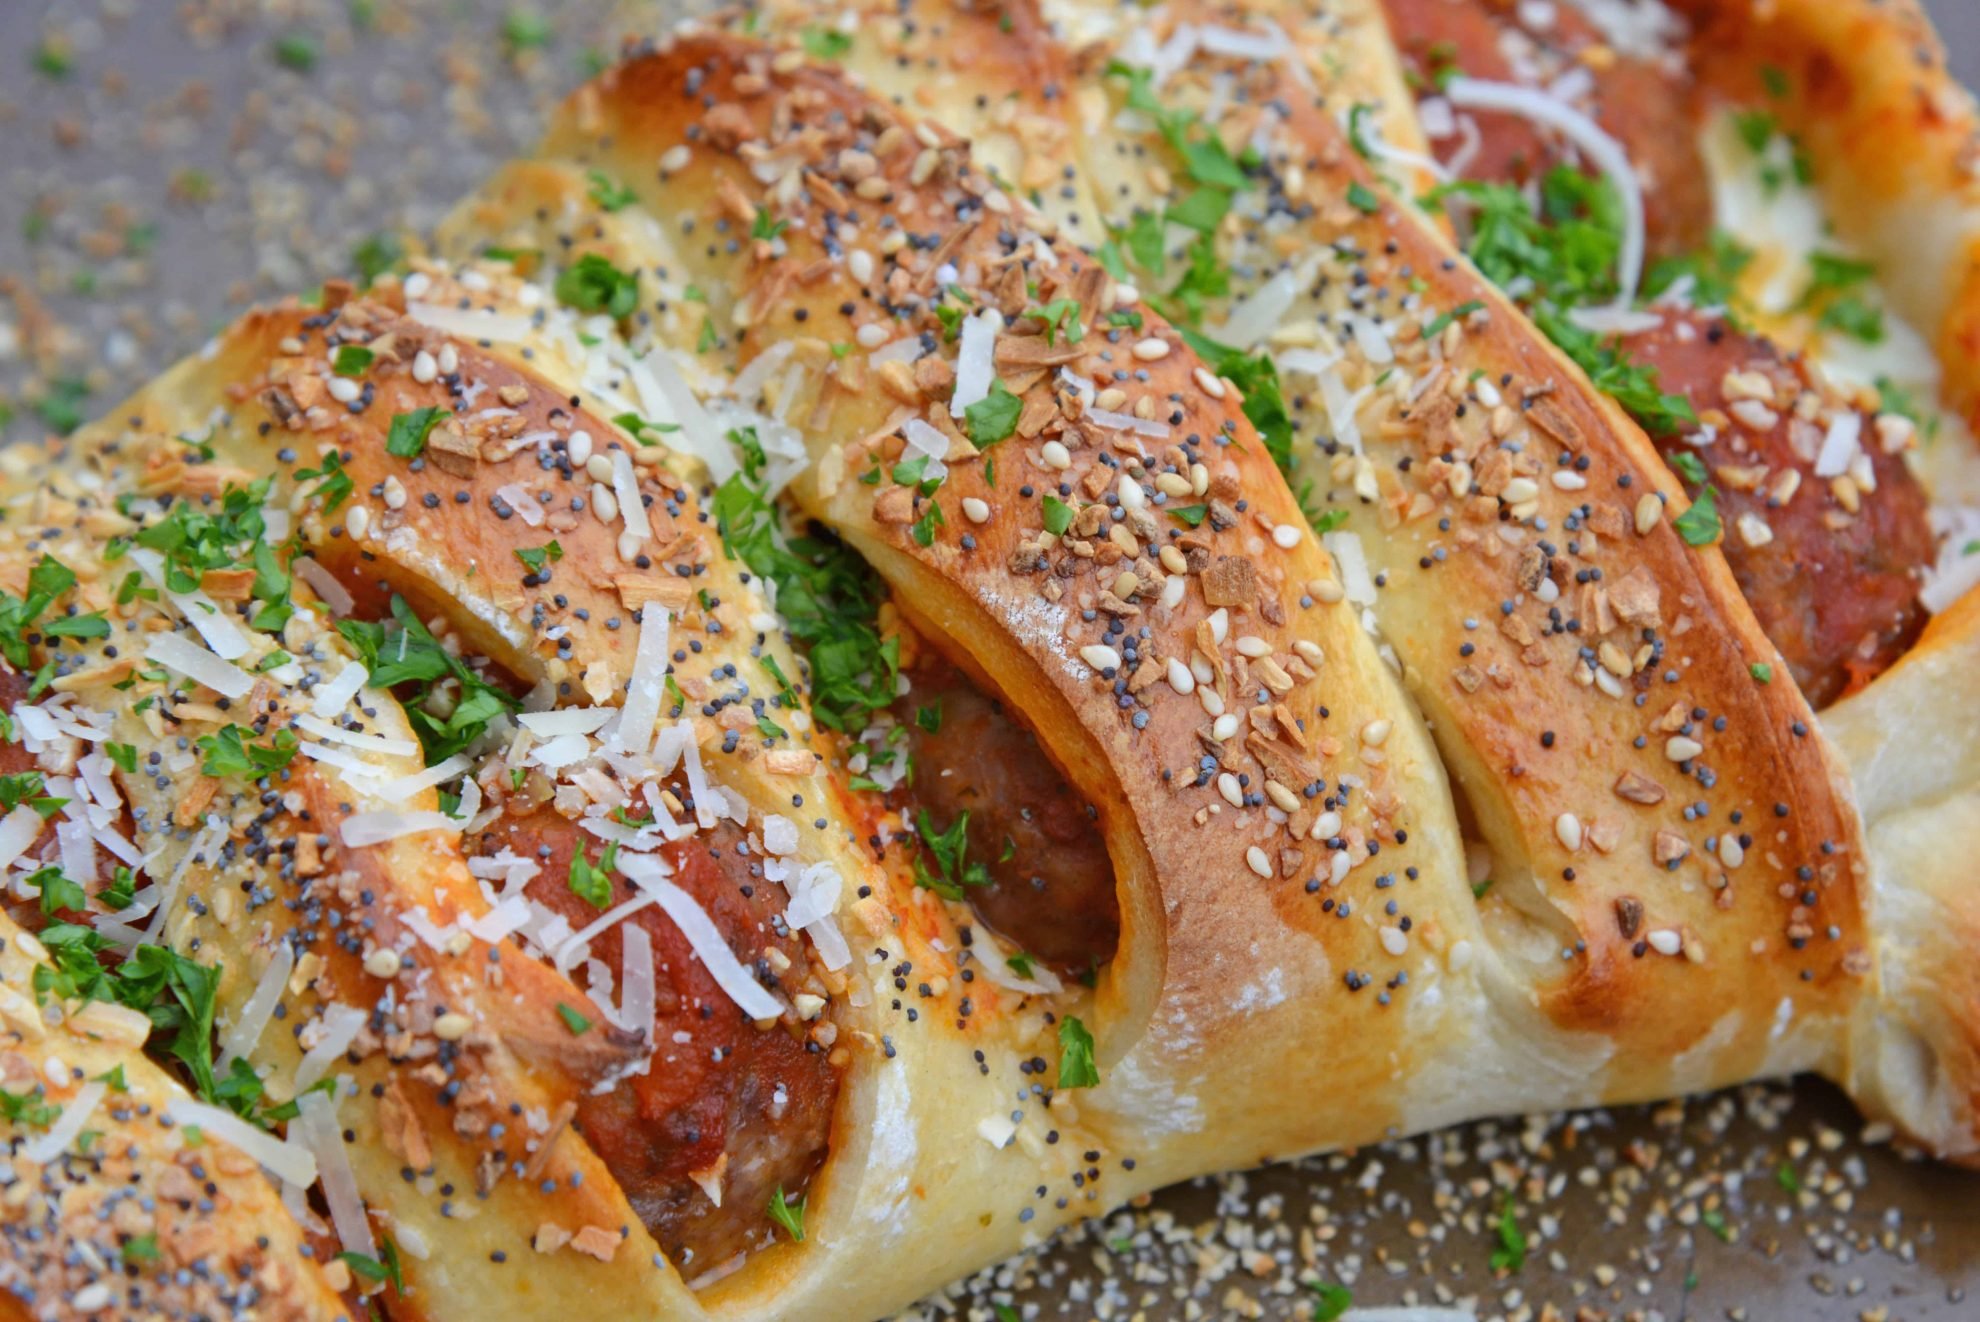 Everything Meatball Stromboli is meatballs, marinara sauce and cheese wrapped in pizza dough topped with everything bagel seasoning. An easy weeknight meal recipe! #howtomakestromboli #strombolirecipe #meatballstromboli www.savoryexperiments.com 